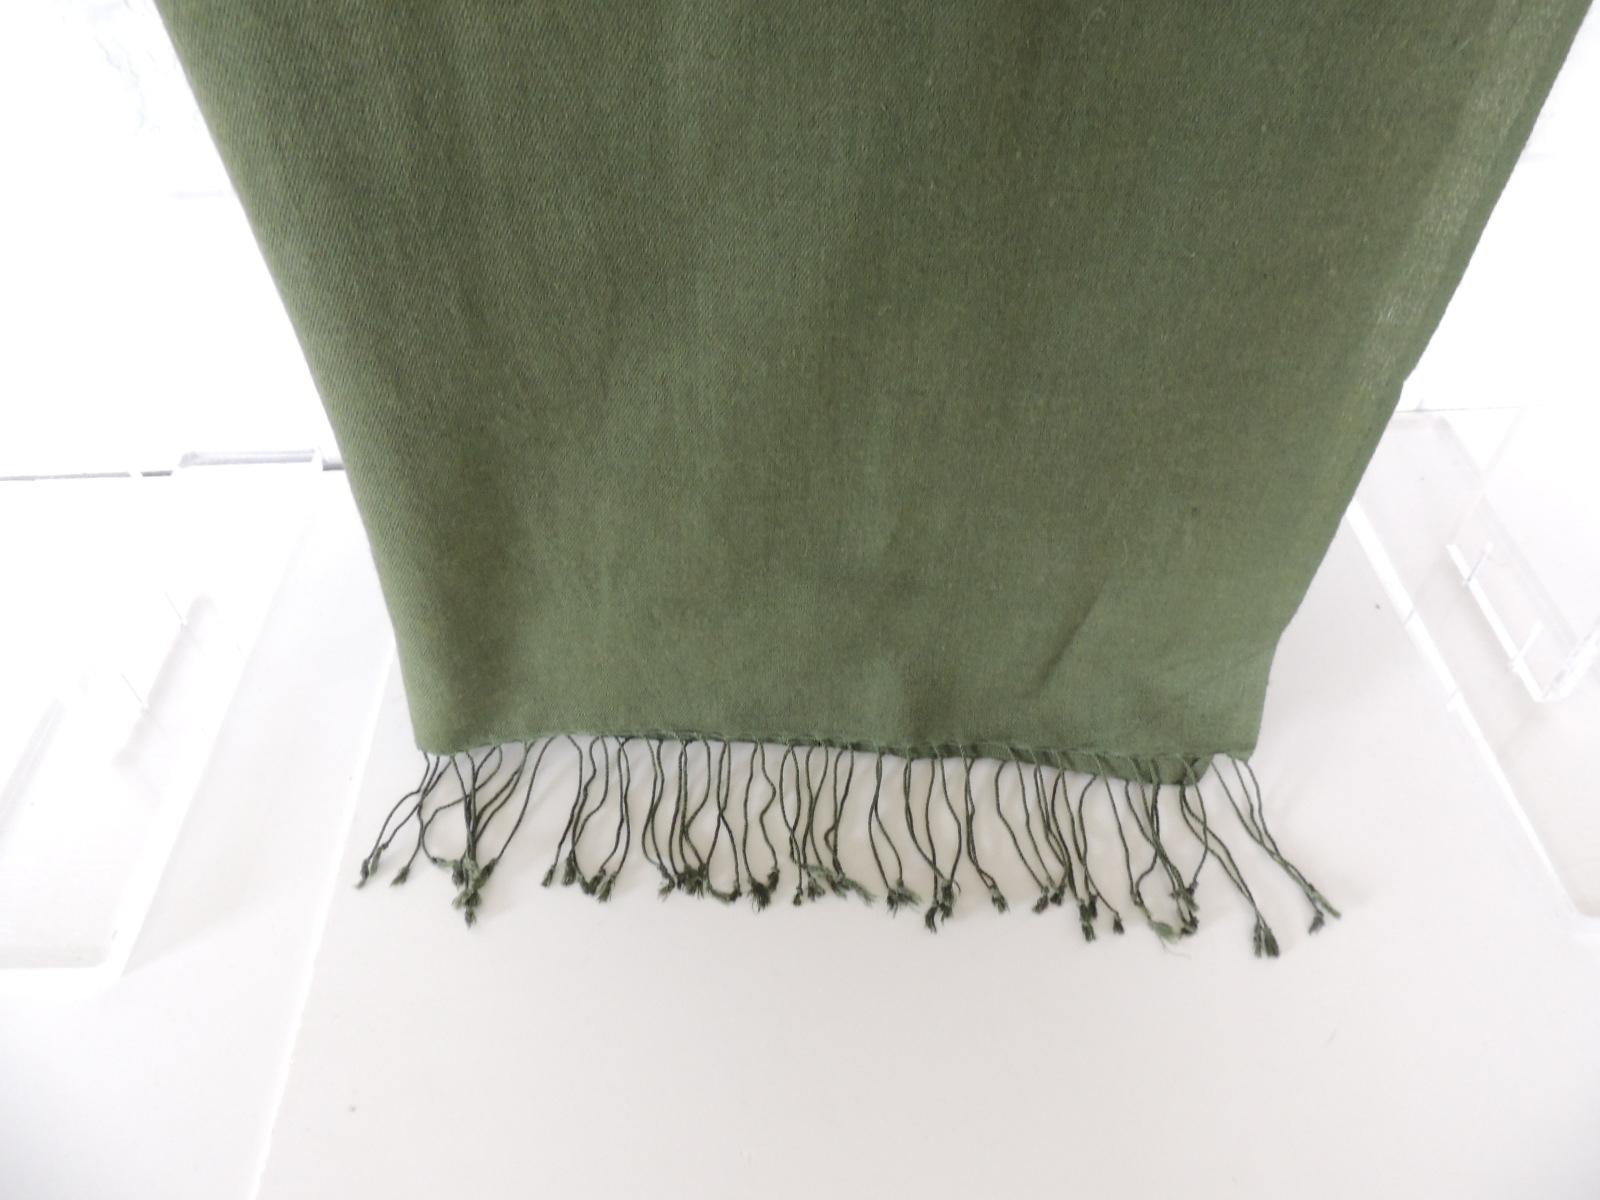 Hunter green wool unisex scarf
Wool and cashmere blend scarf with hand knotted fringes.
Size: 28